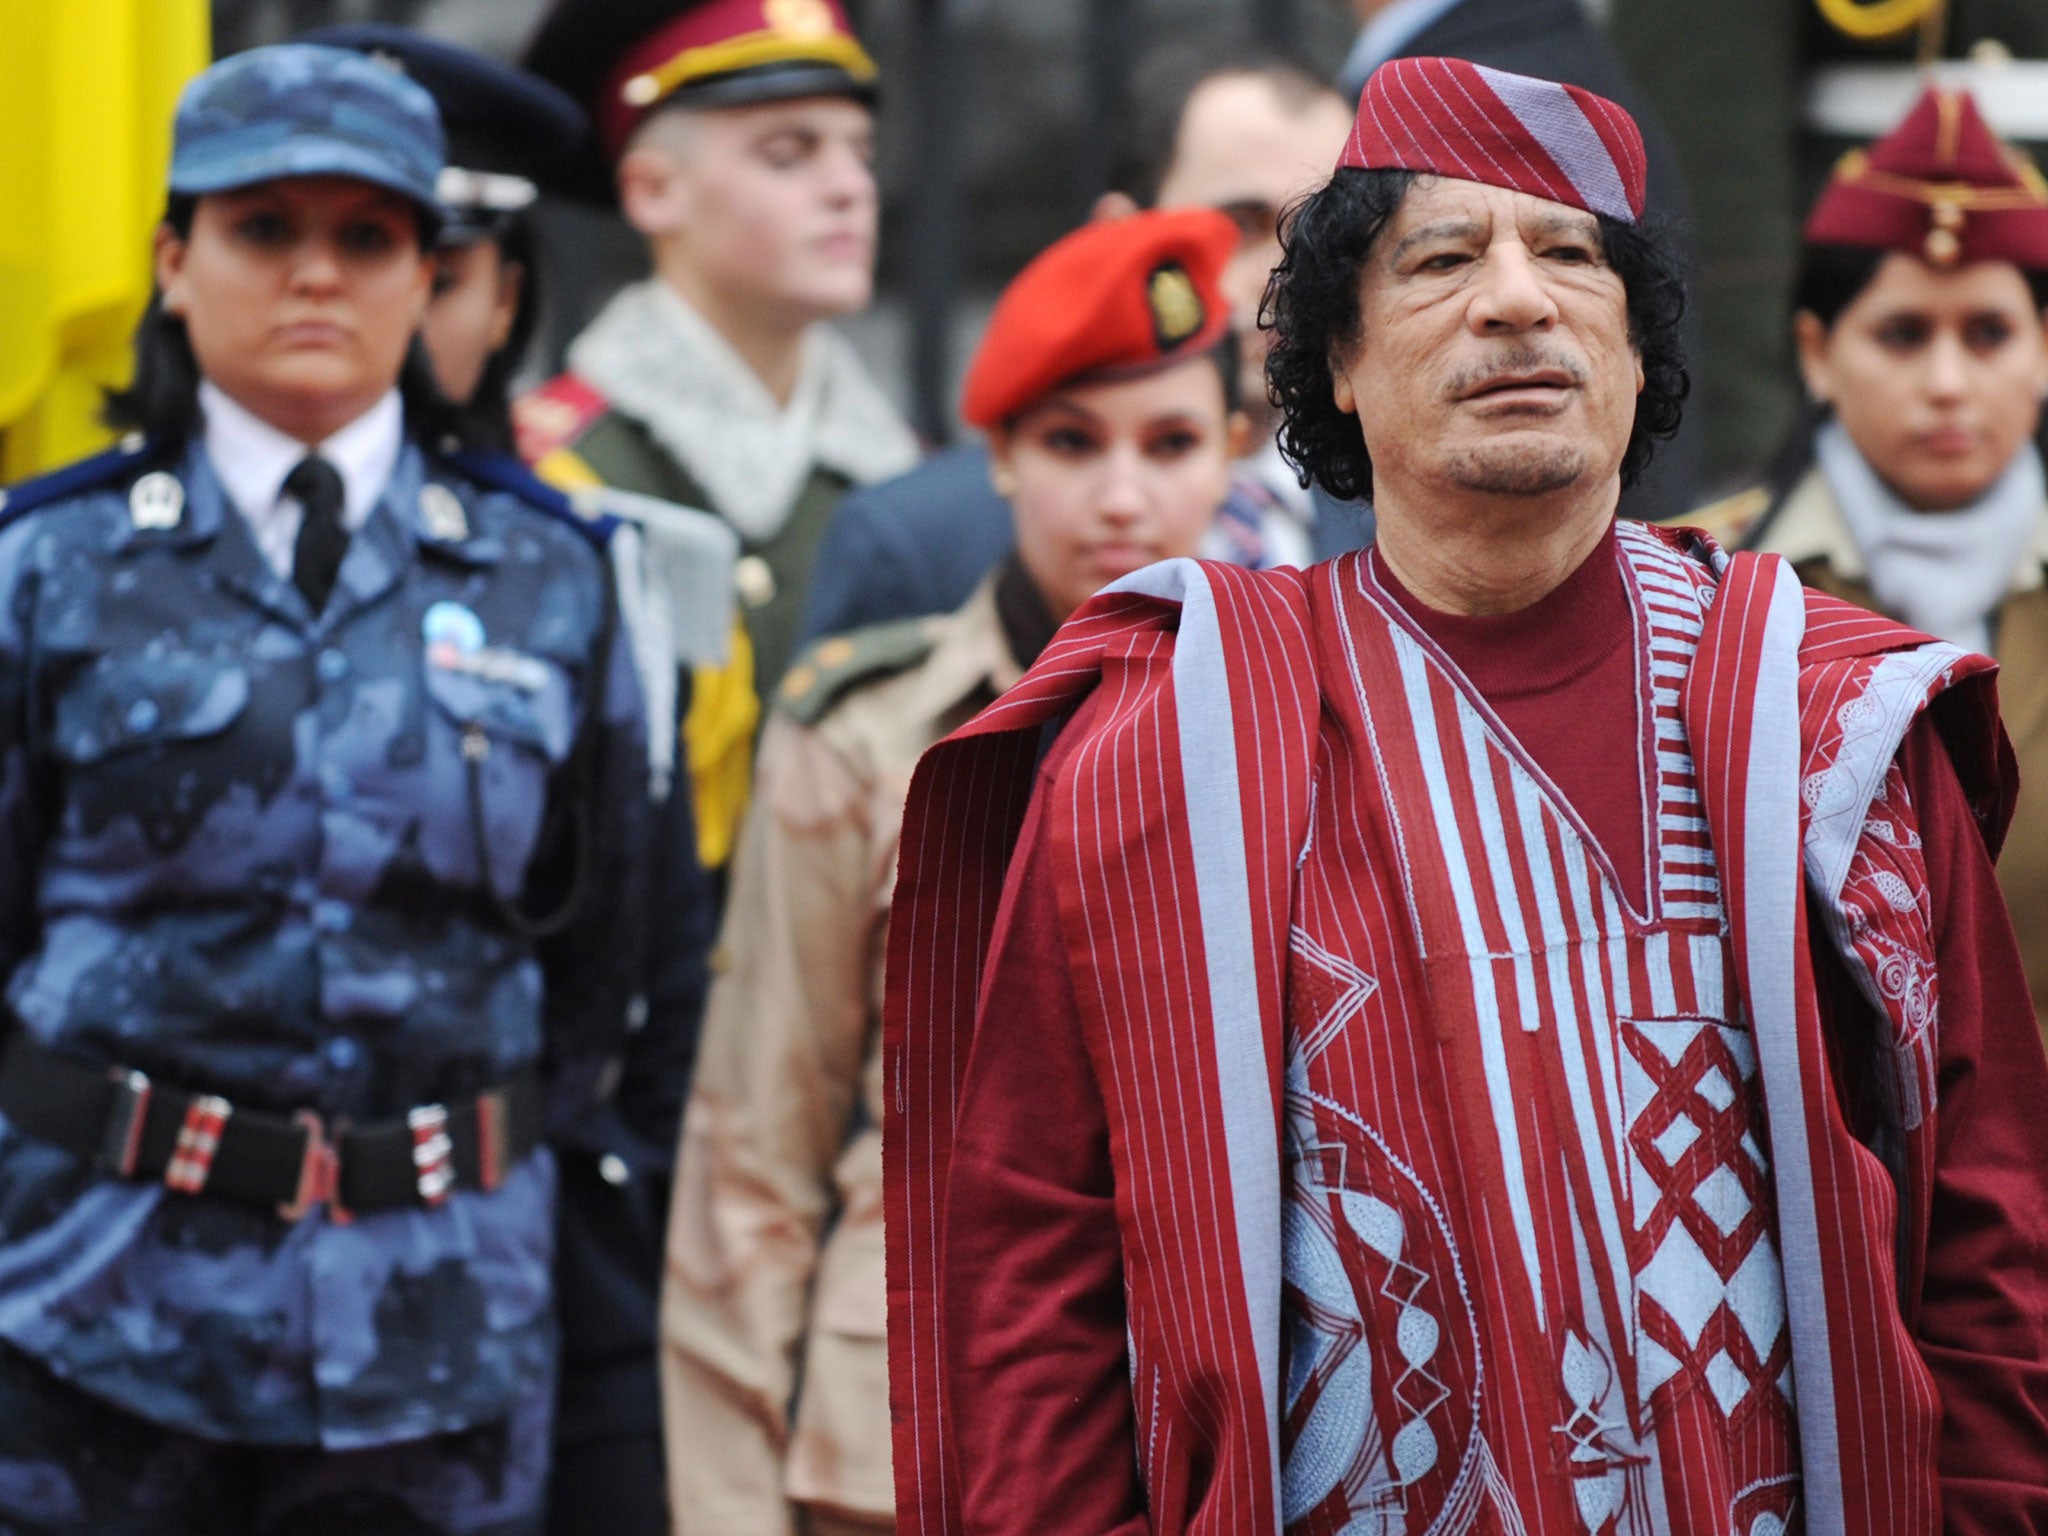 Colonel Gaddafi, pictured in 2008, would not handle letters written to him because of fears for his safety